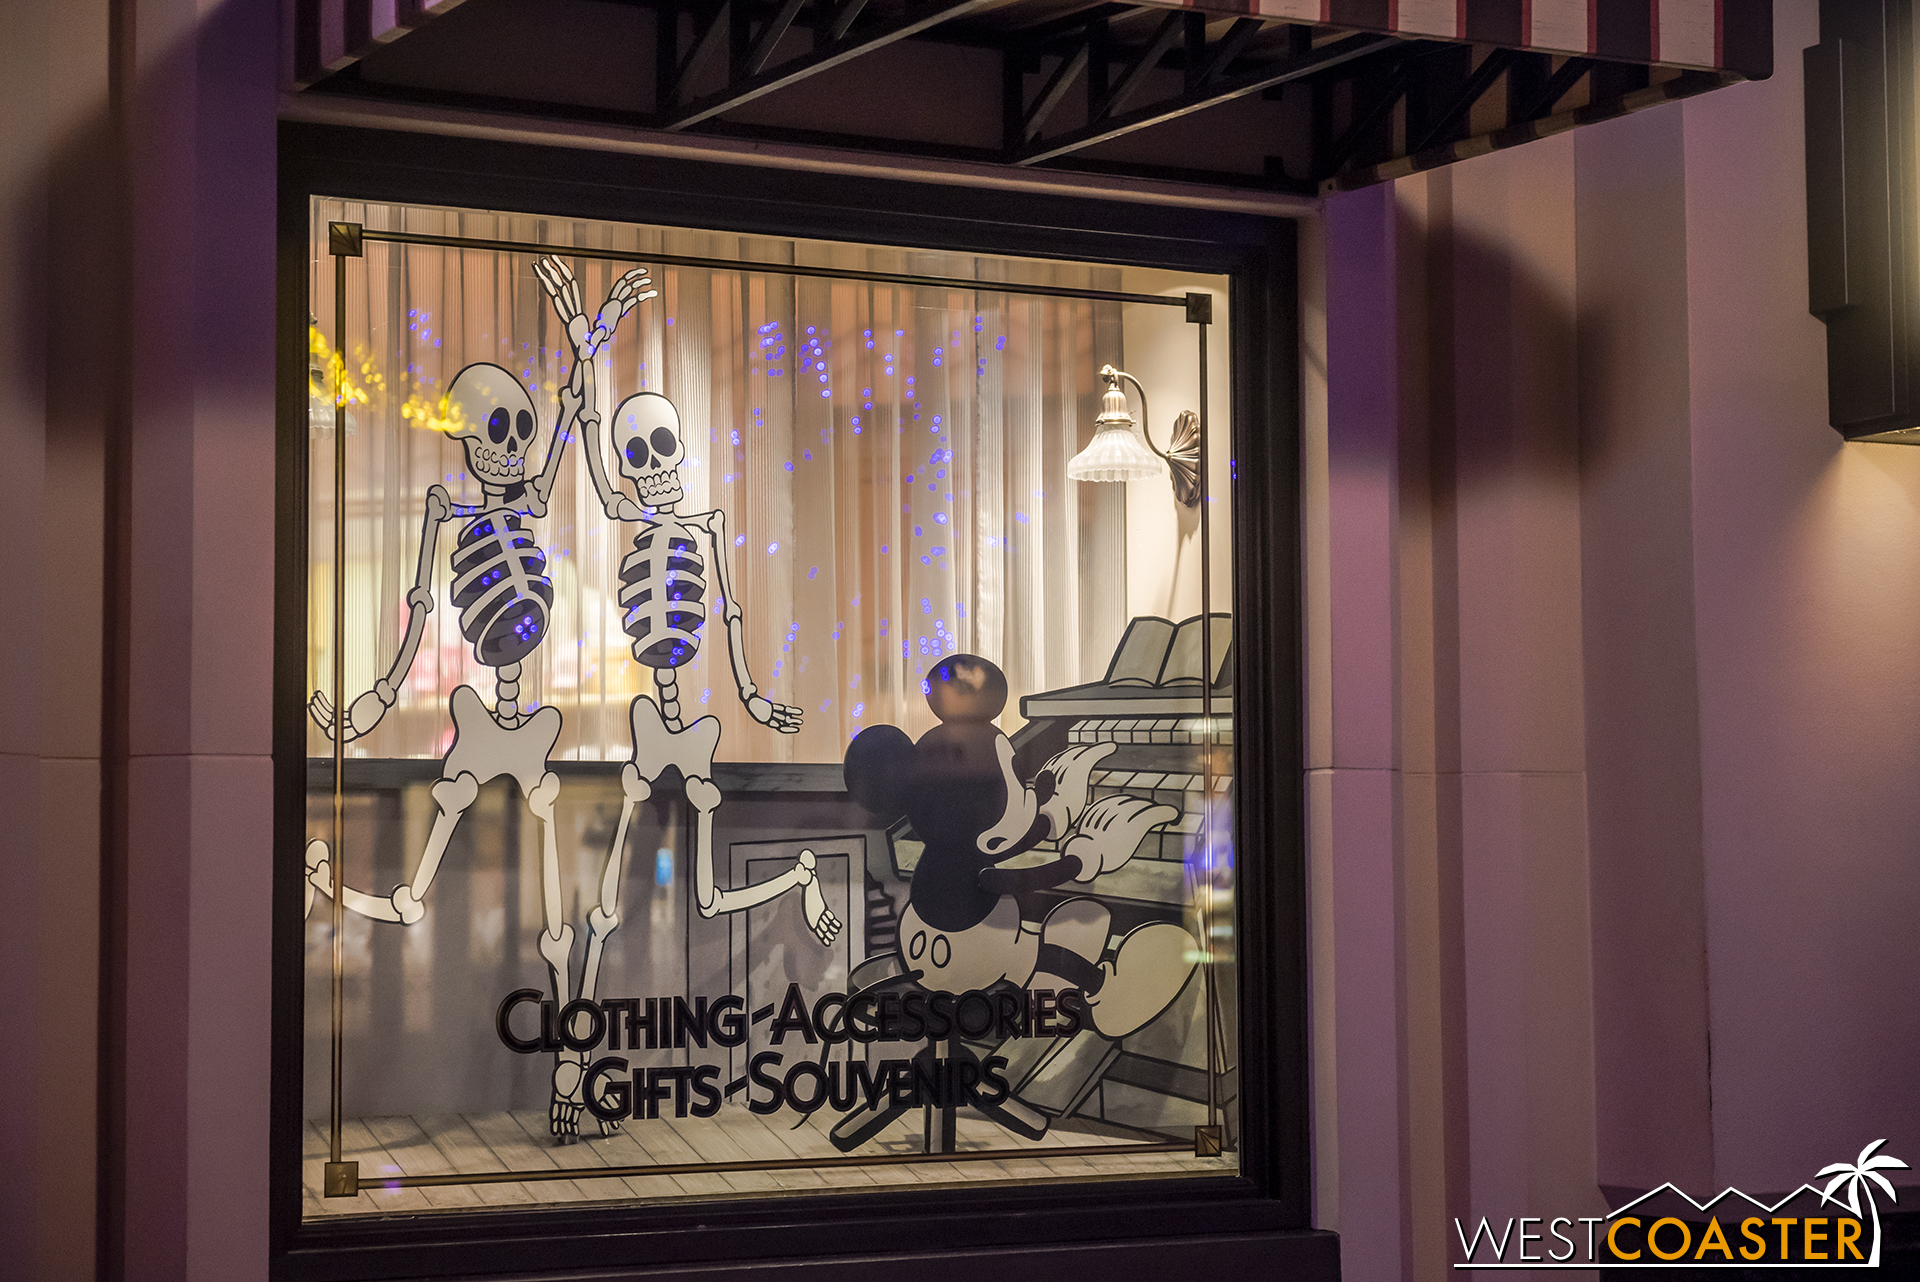  The Buena Vista Street storefronts have been updated with some spooky decor! 